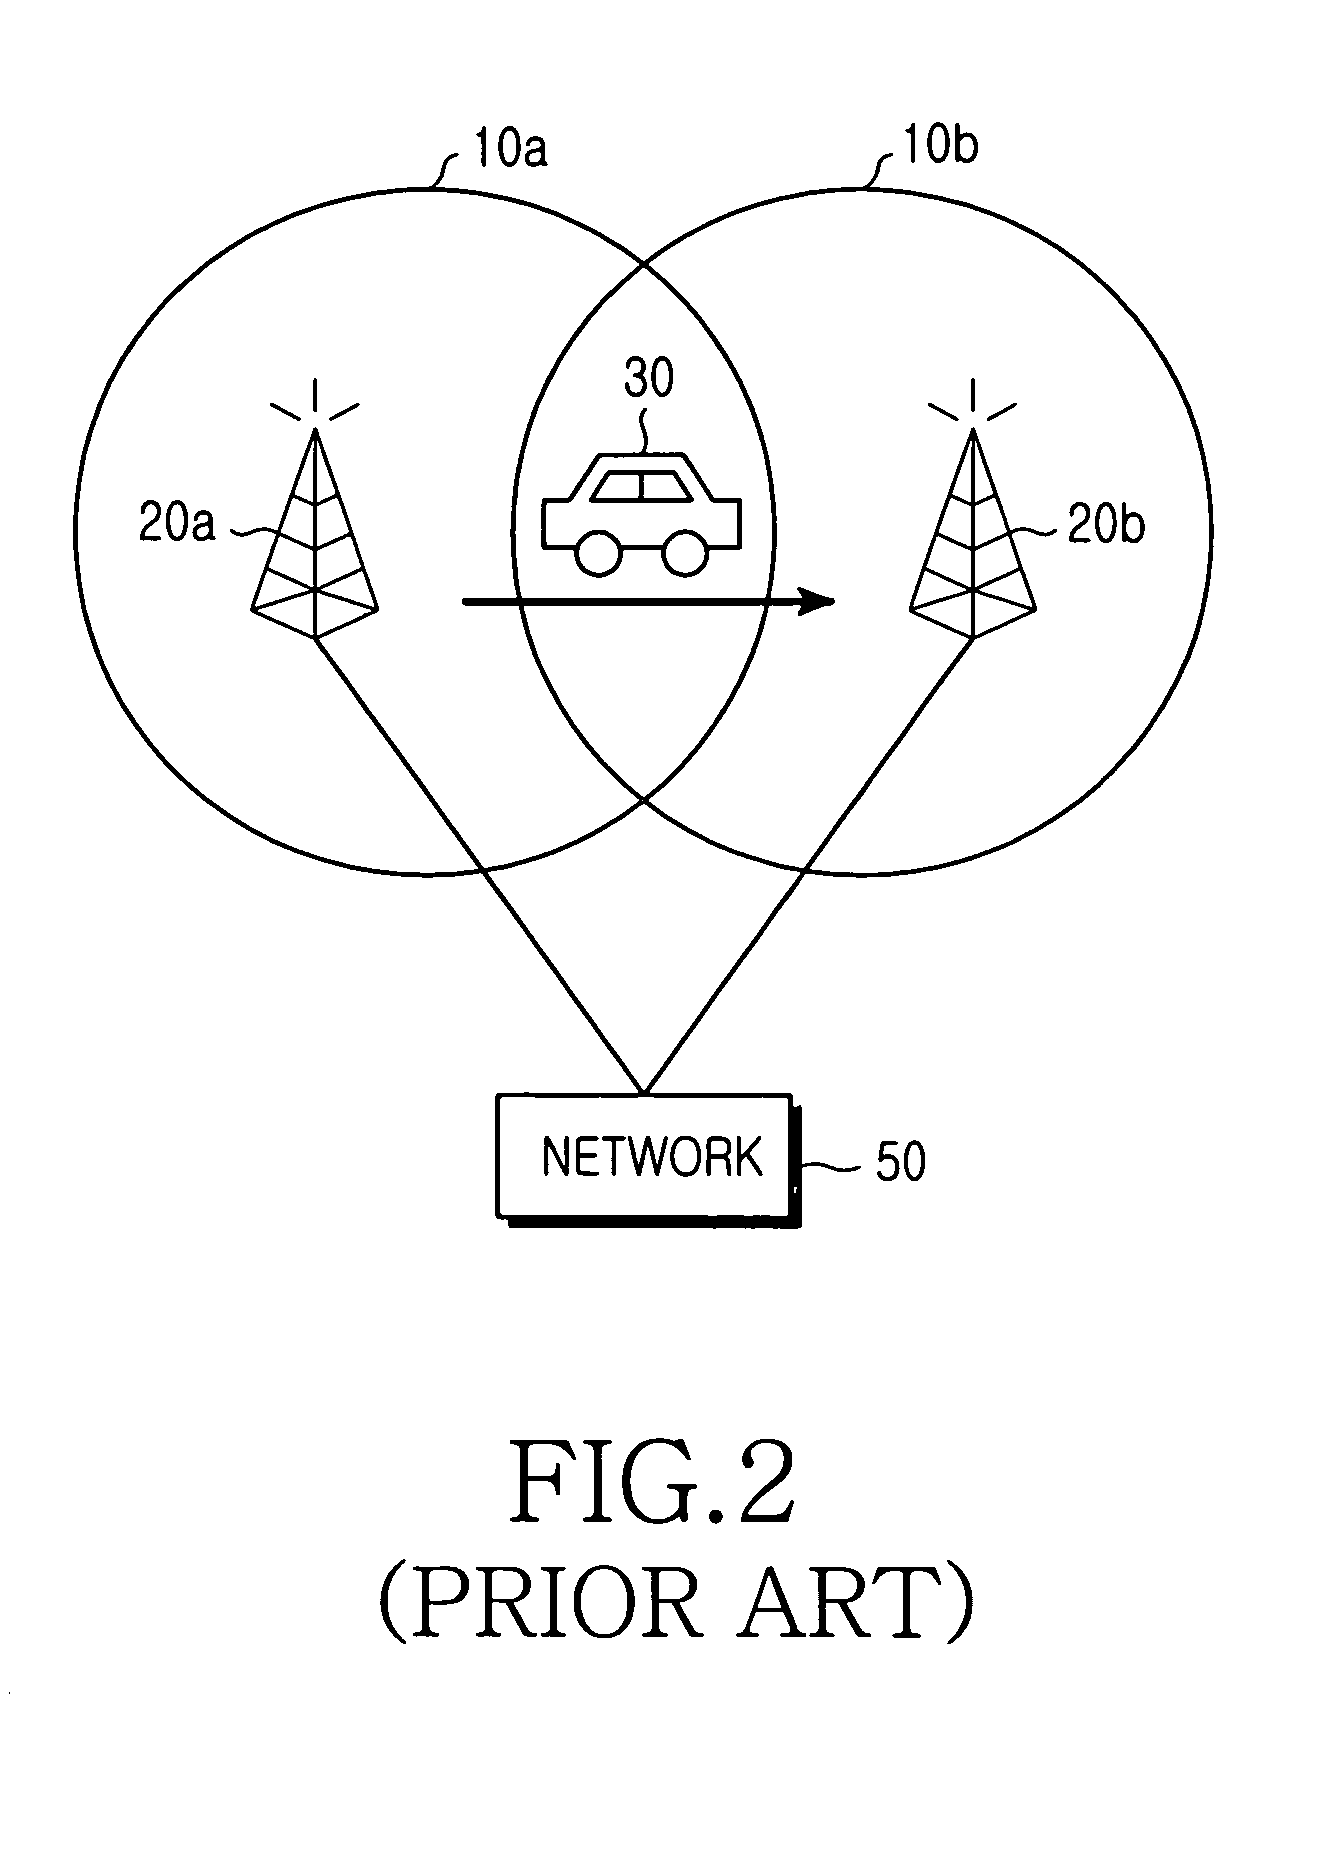 Method of providing a fast downlink service in a hard handover in a cellular communication system